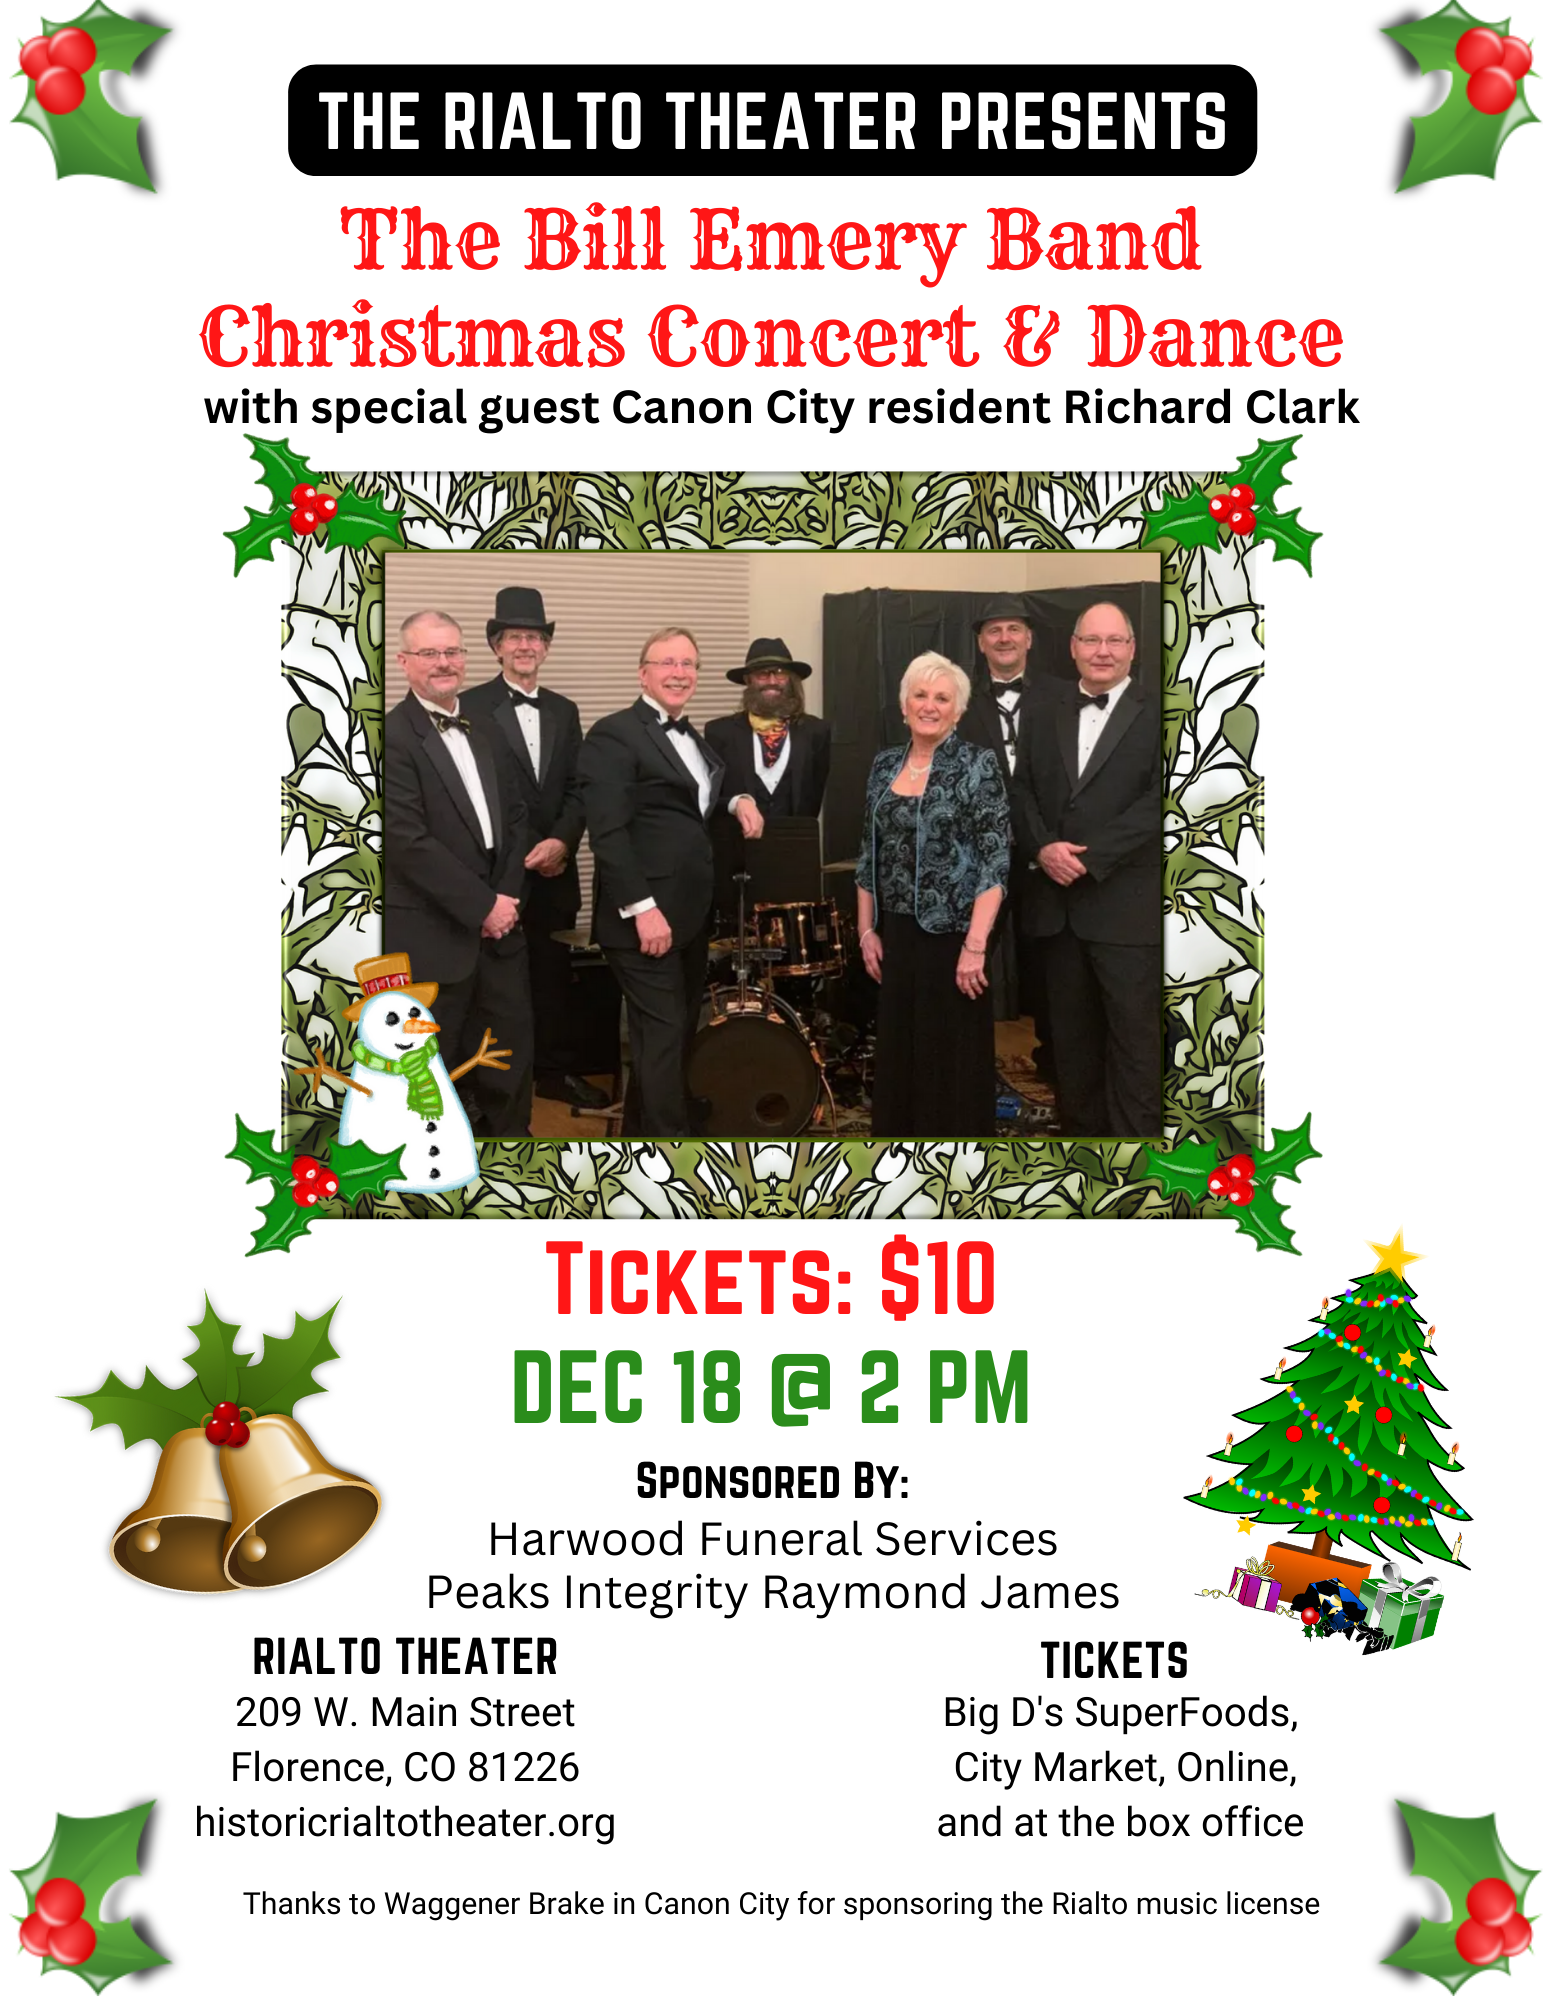 Bill Emery & Friends, Christmas Concert and Dance Dec 18 @ 2pm